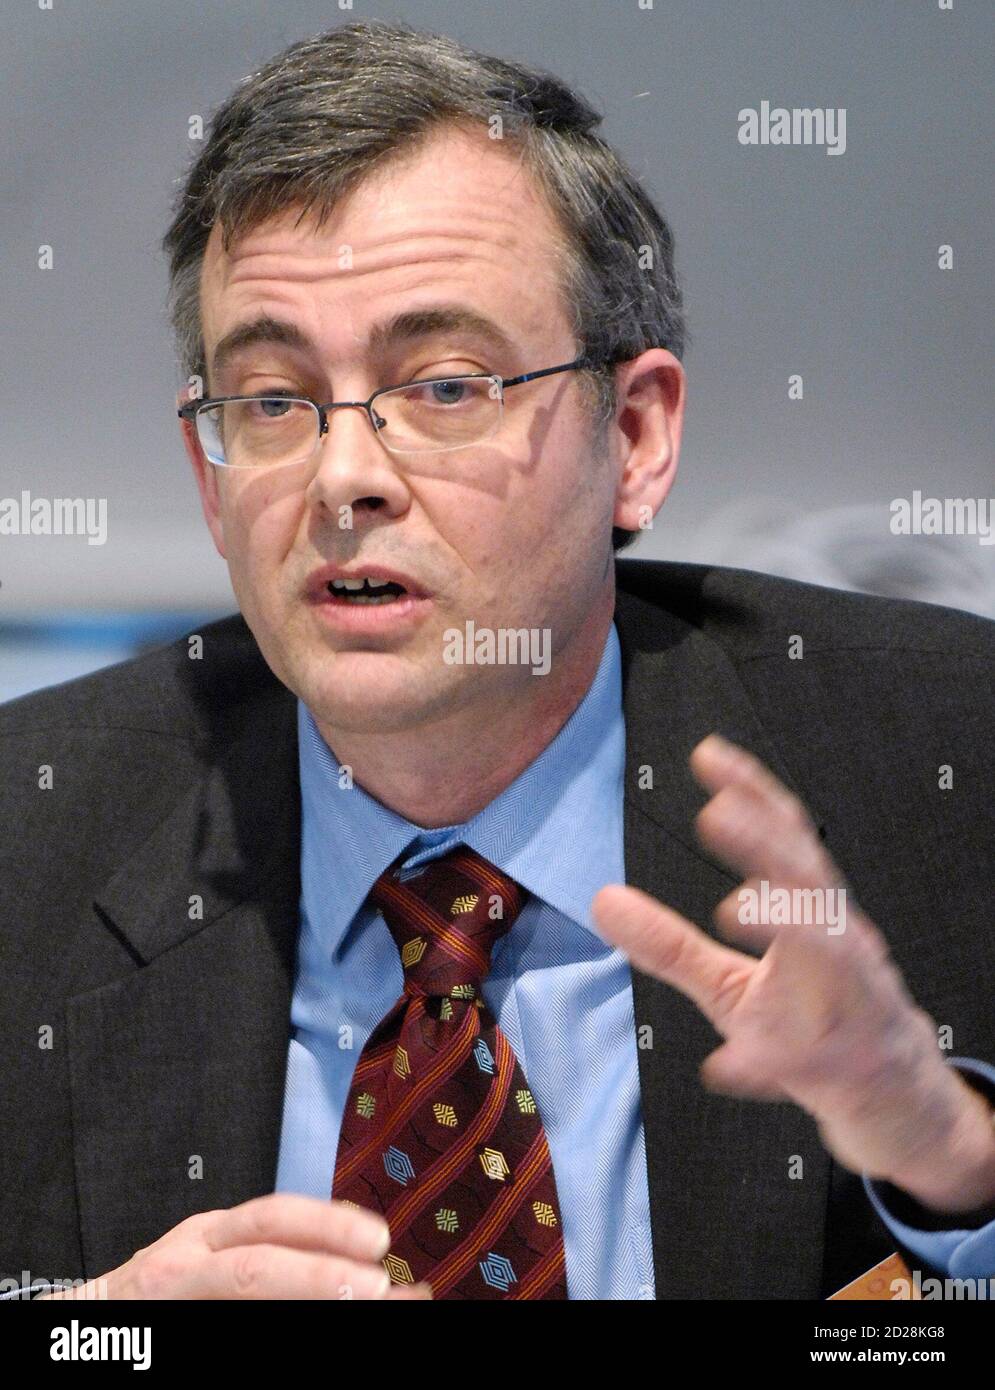 Steve Corneli, Vice President for Regulatory and Government from NRG Energy, speaks about the Global Roundtable on Climate Change during a news conference at Columbia University, in New York, February 20, 2007.  REUTERS/Chip East  (UNITED STATES) Stock Photo